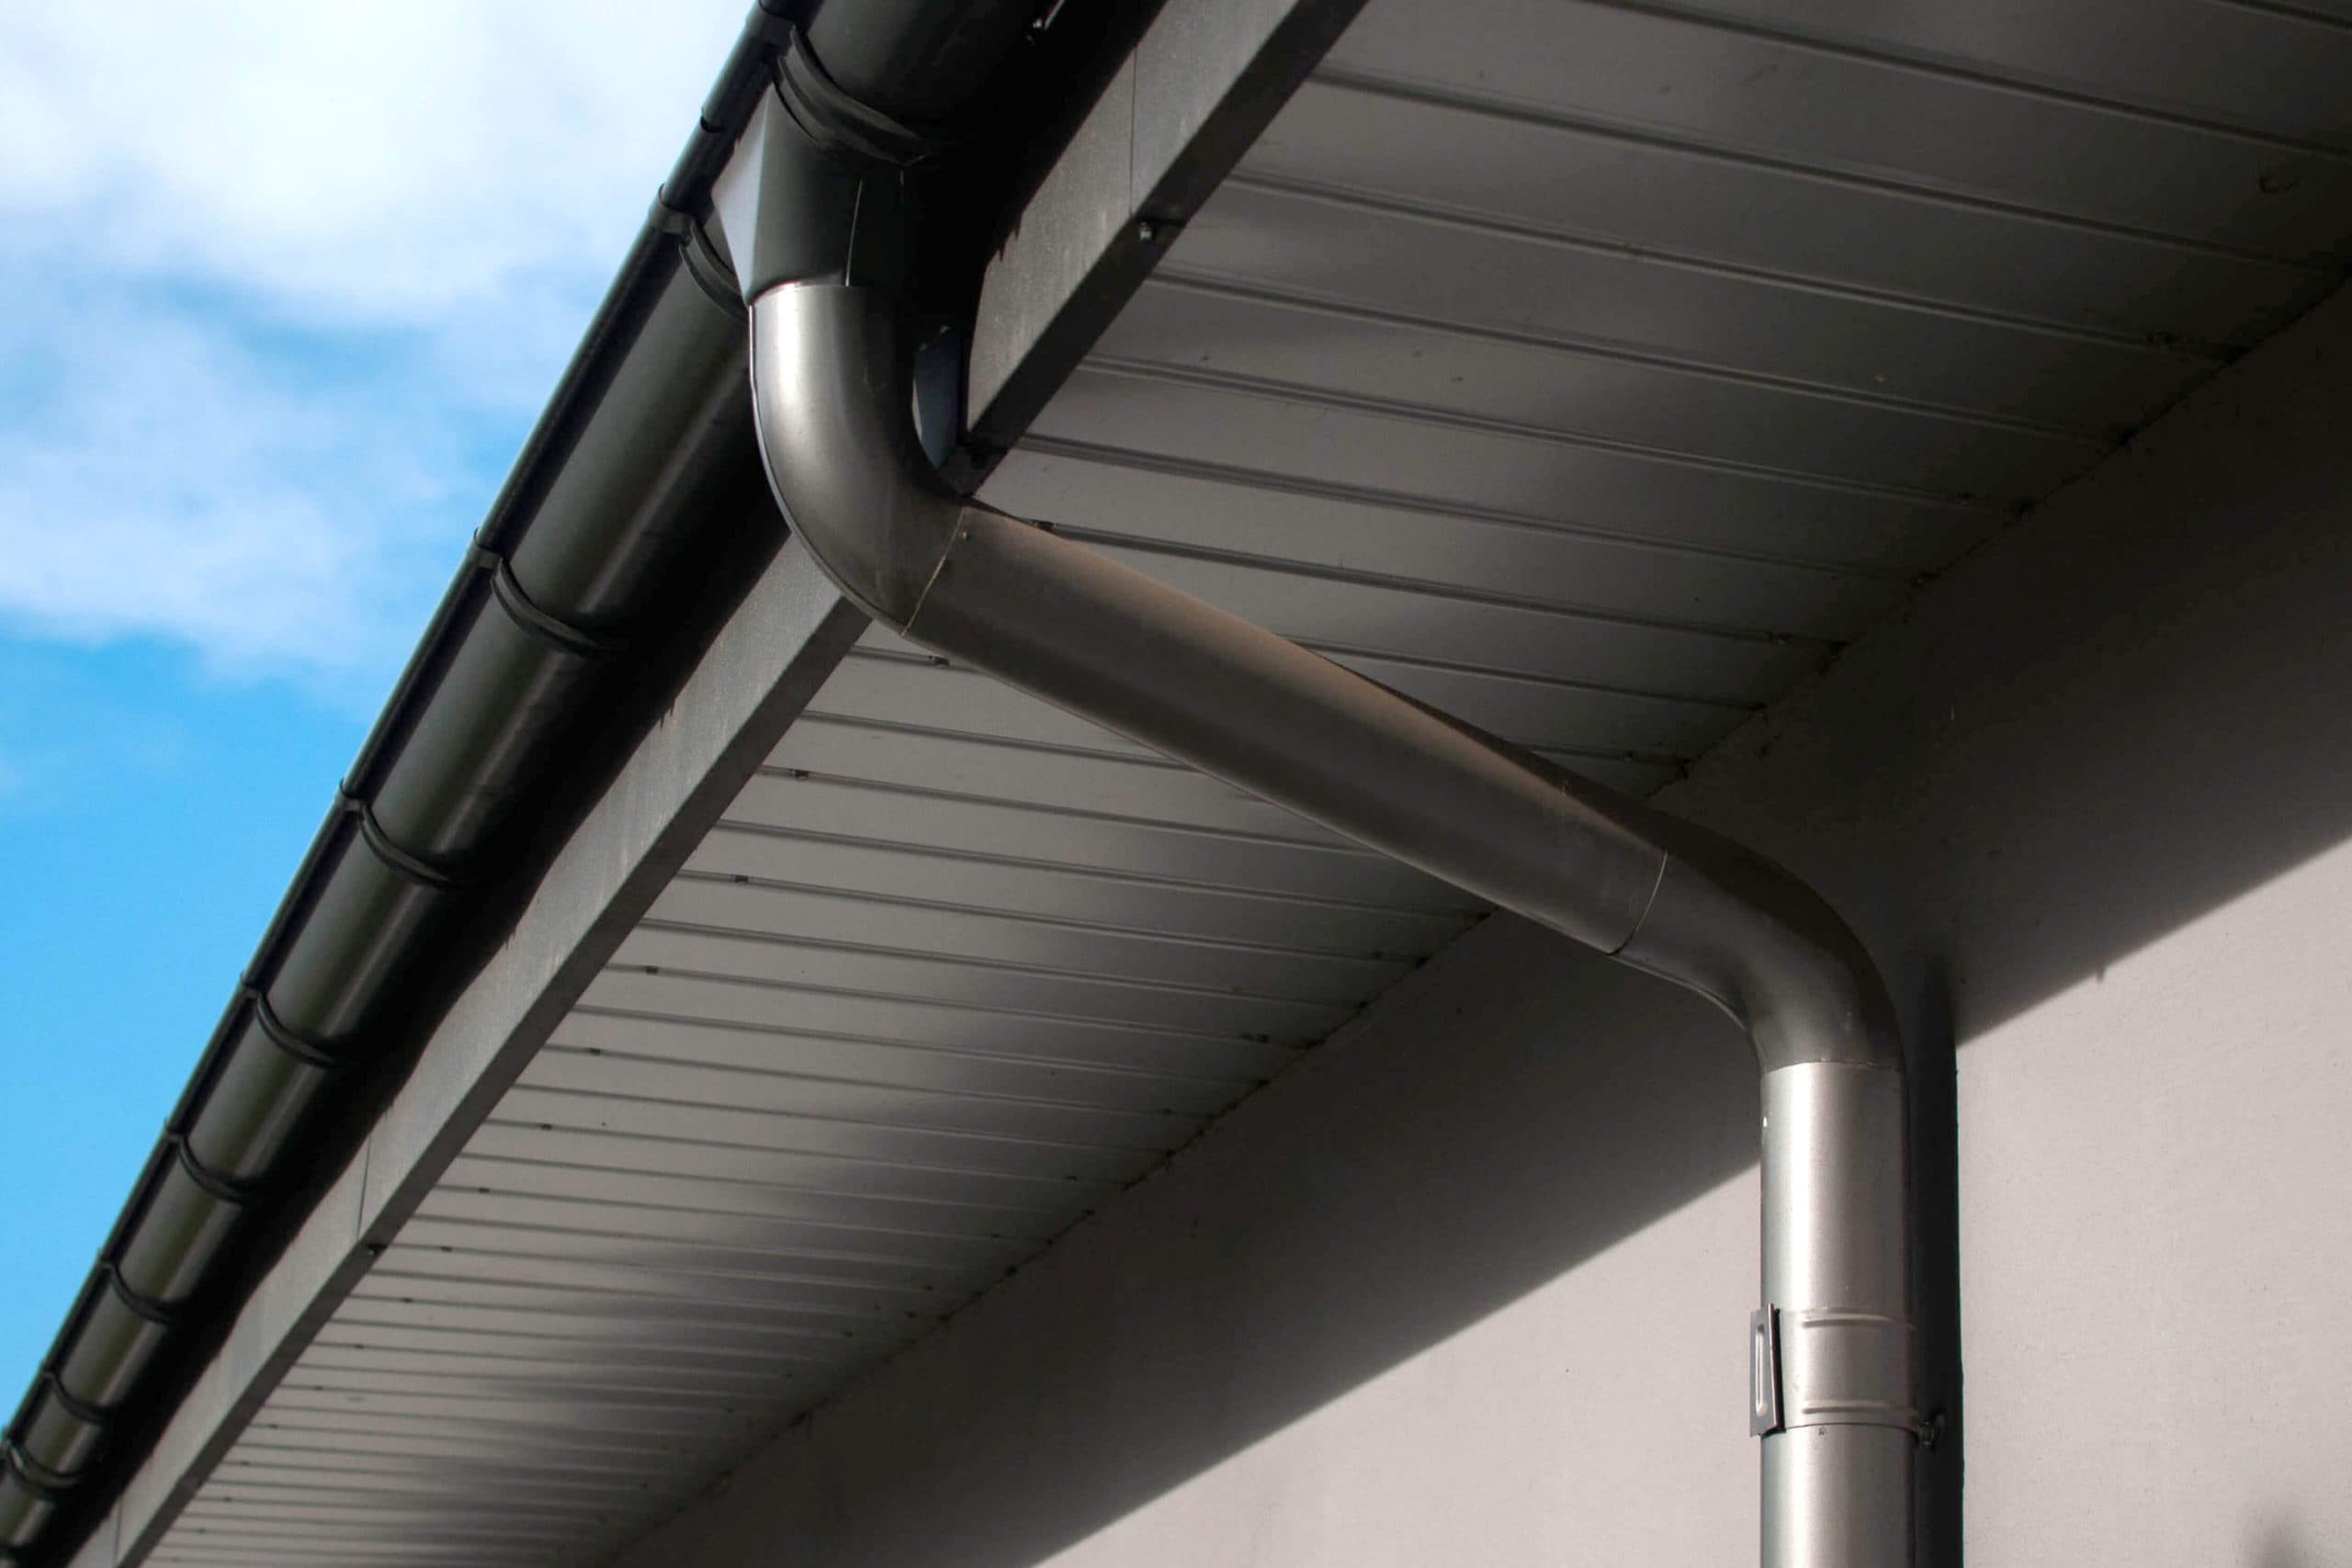 Reliable and affordable Galvanized gutters installation in Plano